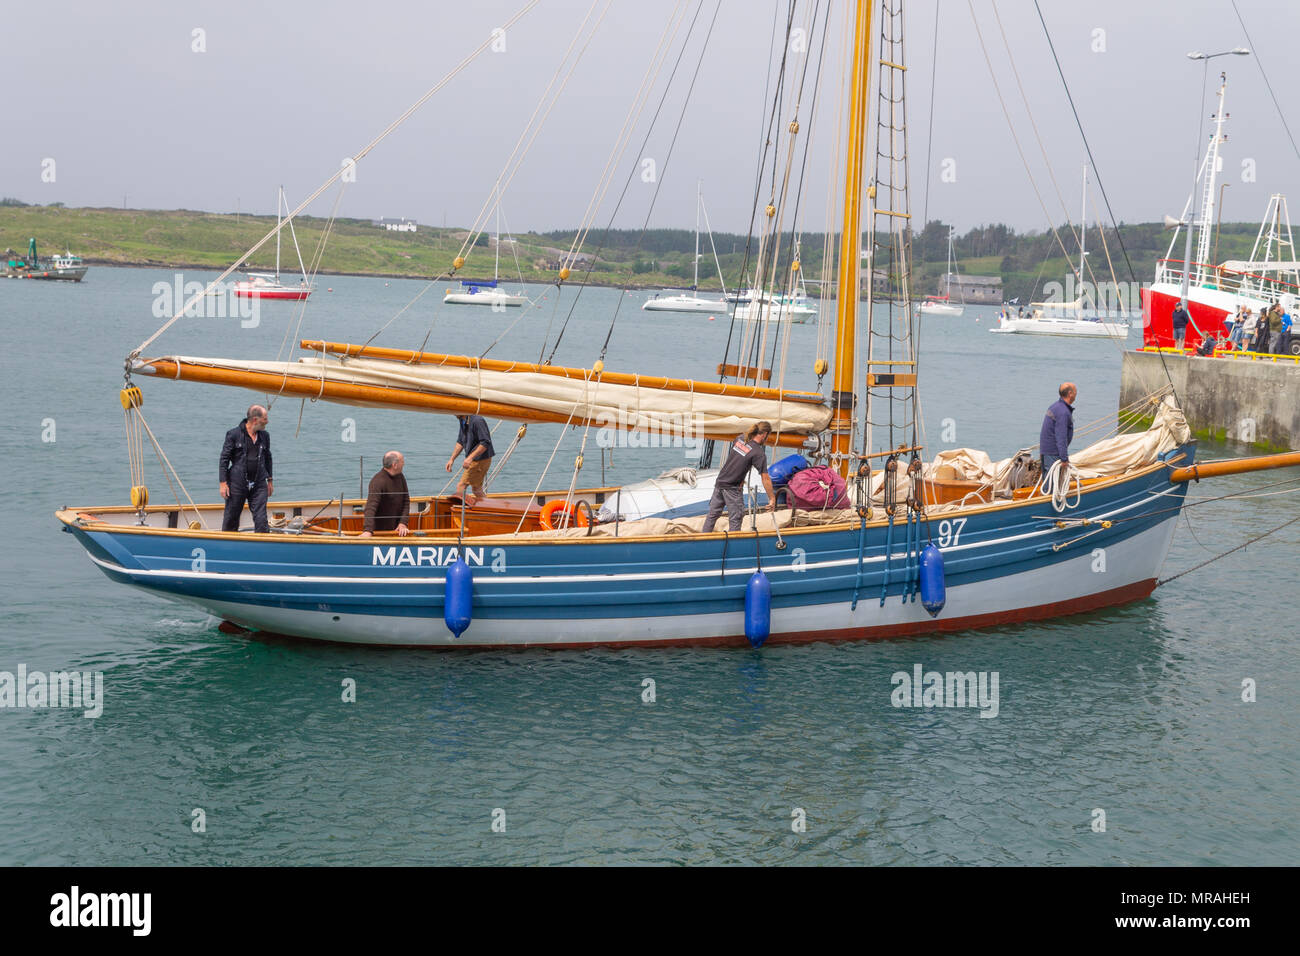 Baltimore, Ireland 26th May, 2018. Wooden boats of all shapes and sizes gather for the Wooden Boat Festival this weekend, with boats under sail racing, a boat building competition, a spectacular parade of sail boats, plus many other attractions, all in conjunction with the Baltimore Sea Food Festival. Credit: aphperspective/Alamy Live News Stock Photo